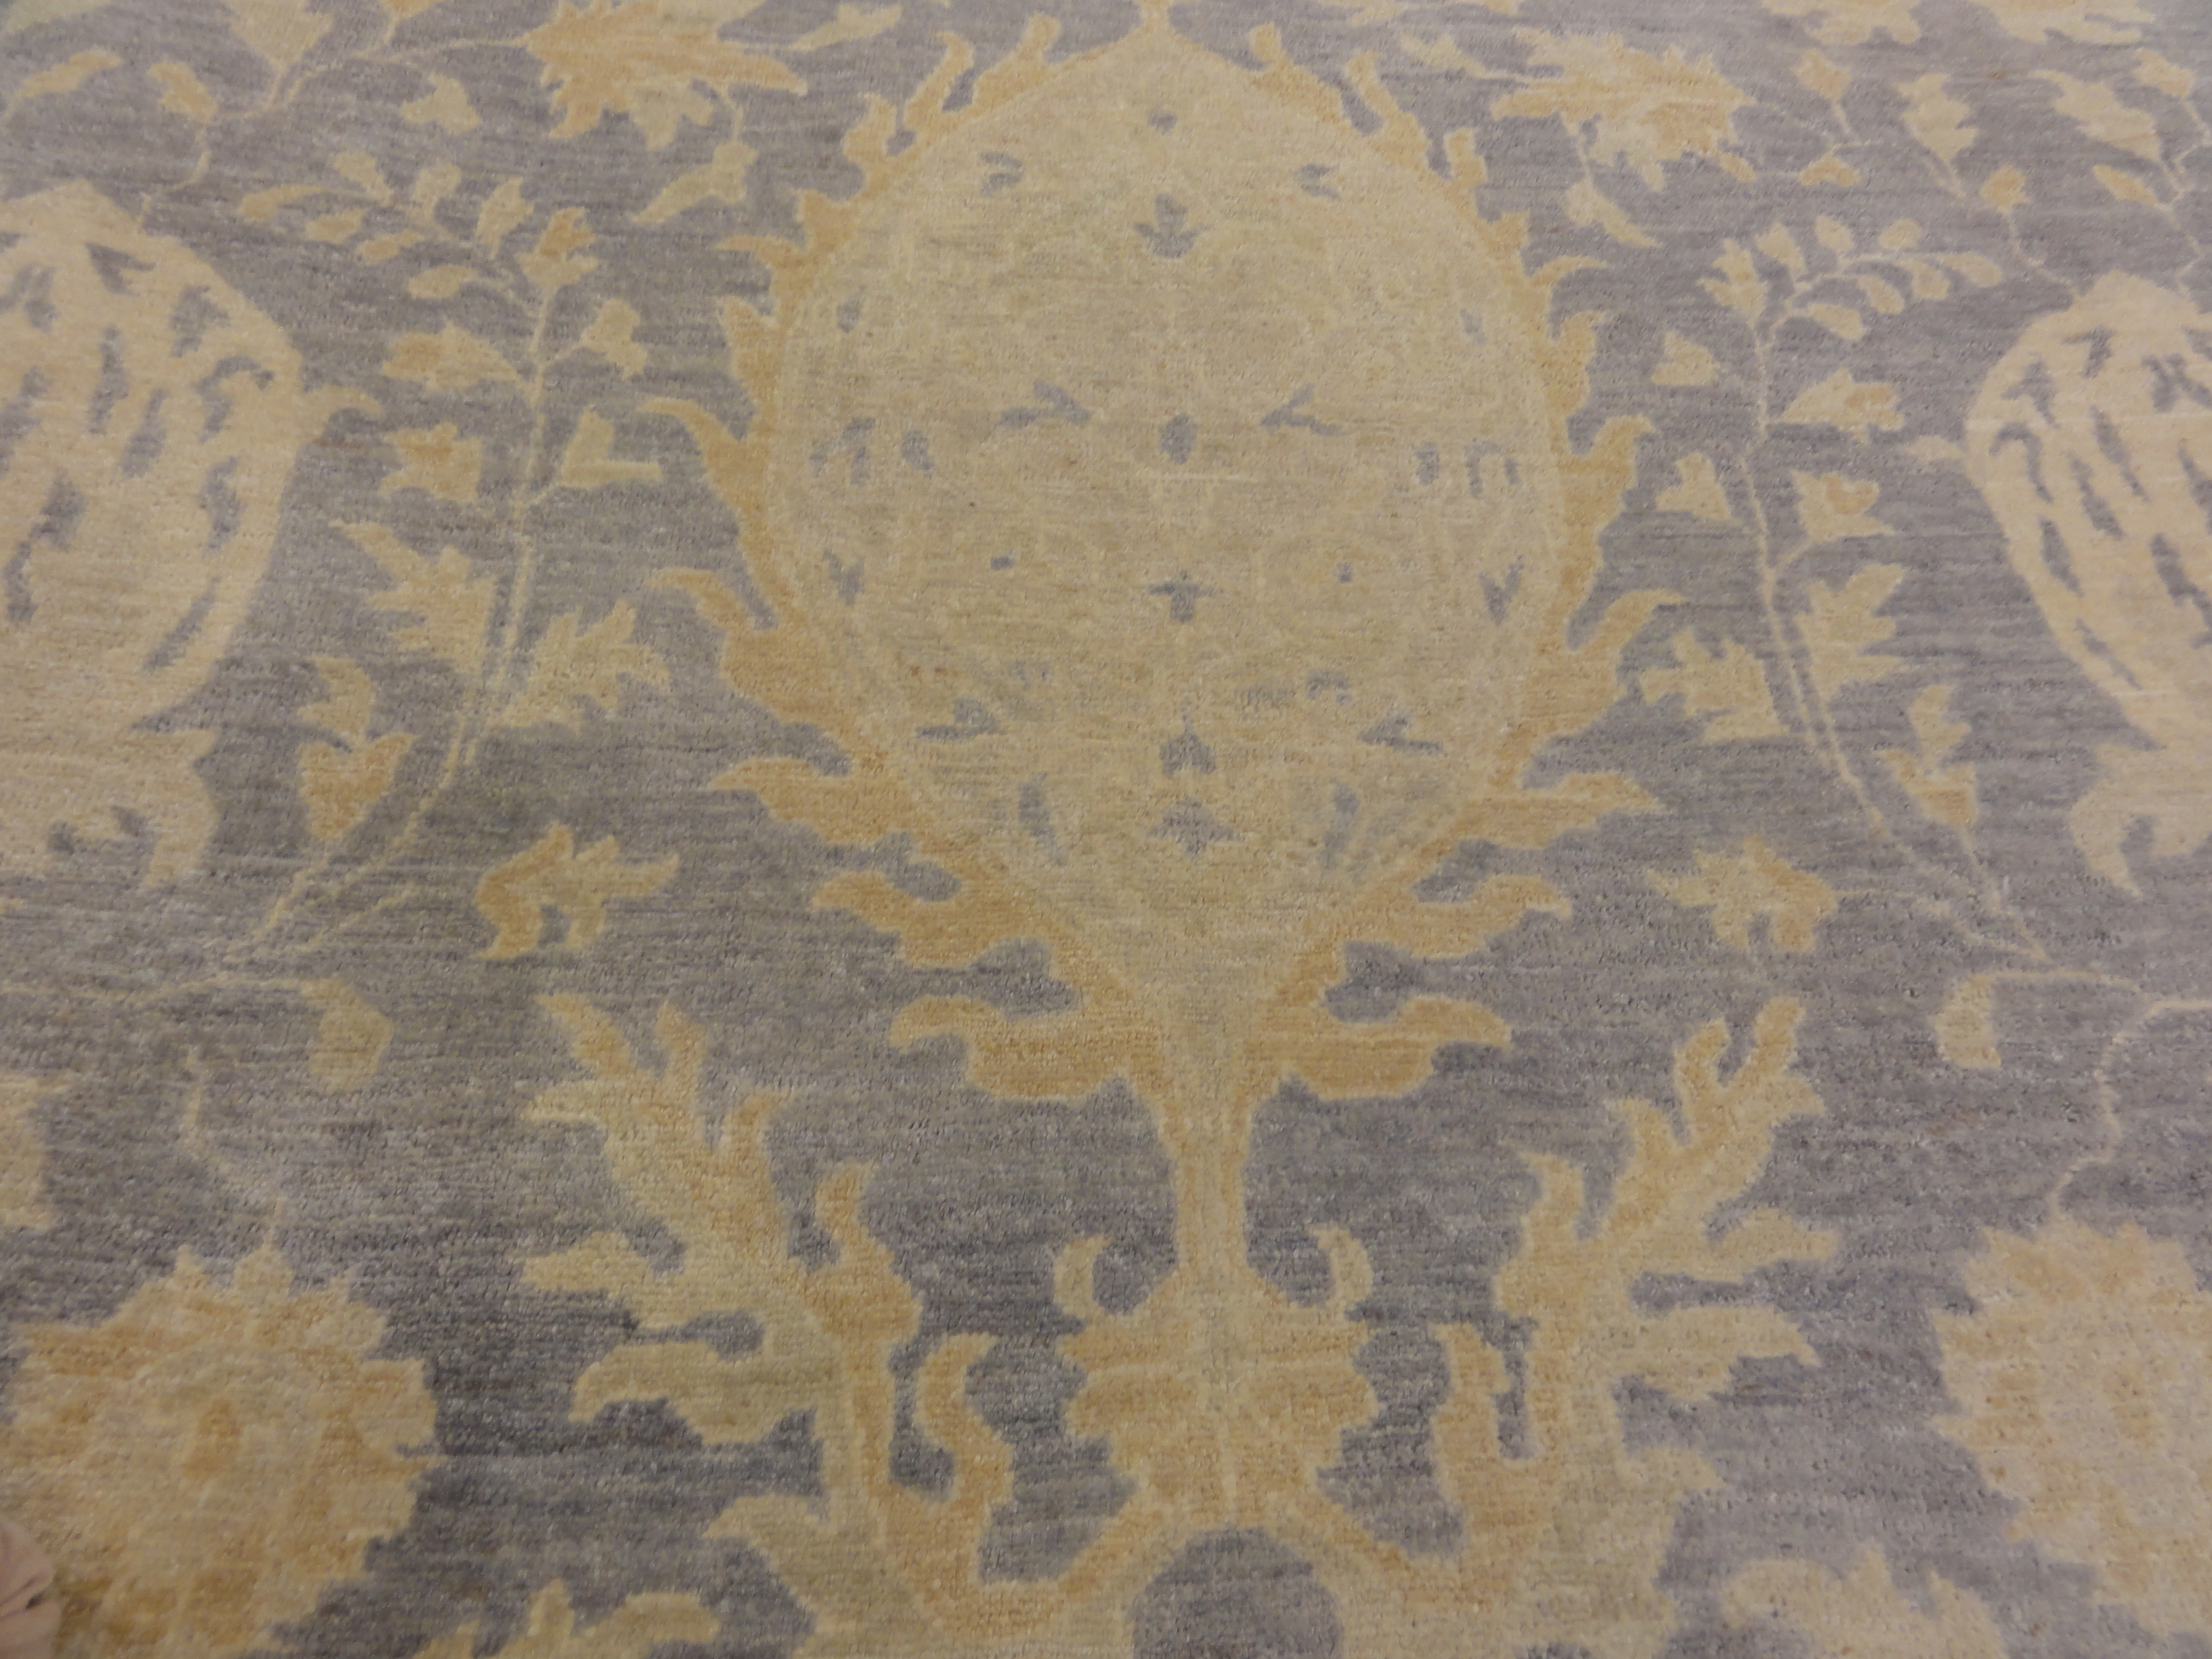 Finest Ziegler Oushak 30289. A piece of genuine, woven, authentic carpet design sold by Santa Barbara Design Center, Rugs and More.